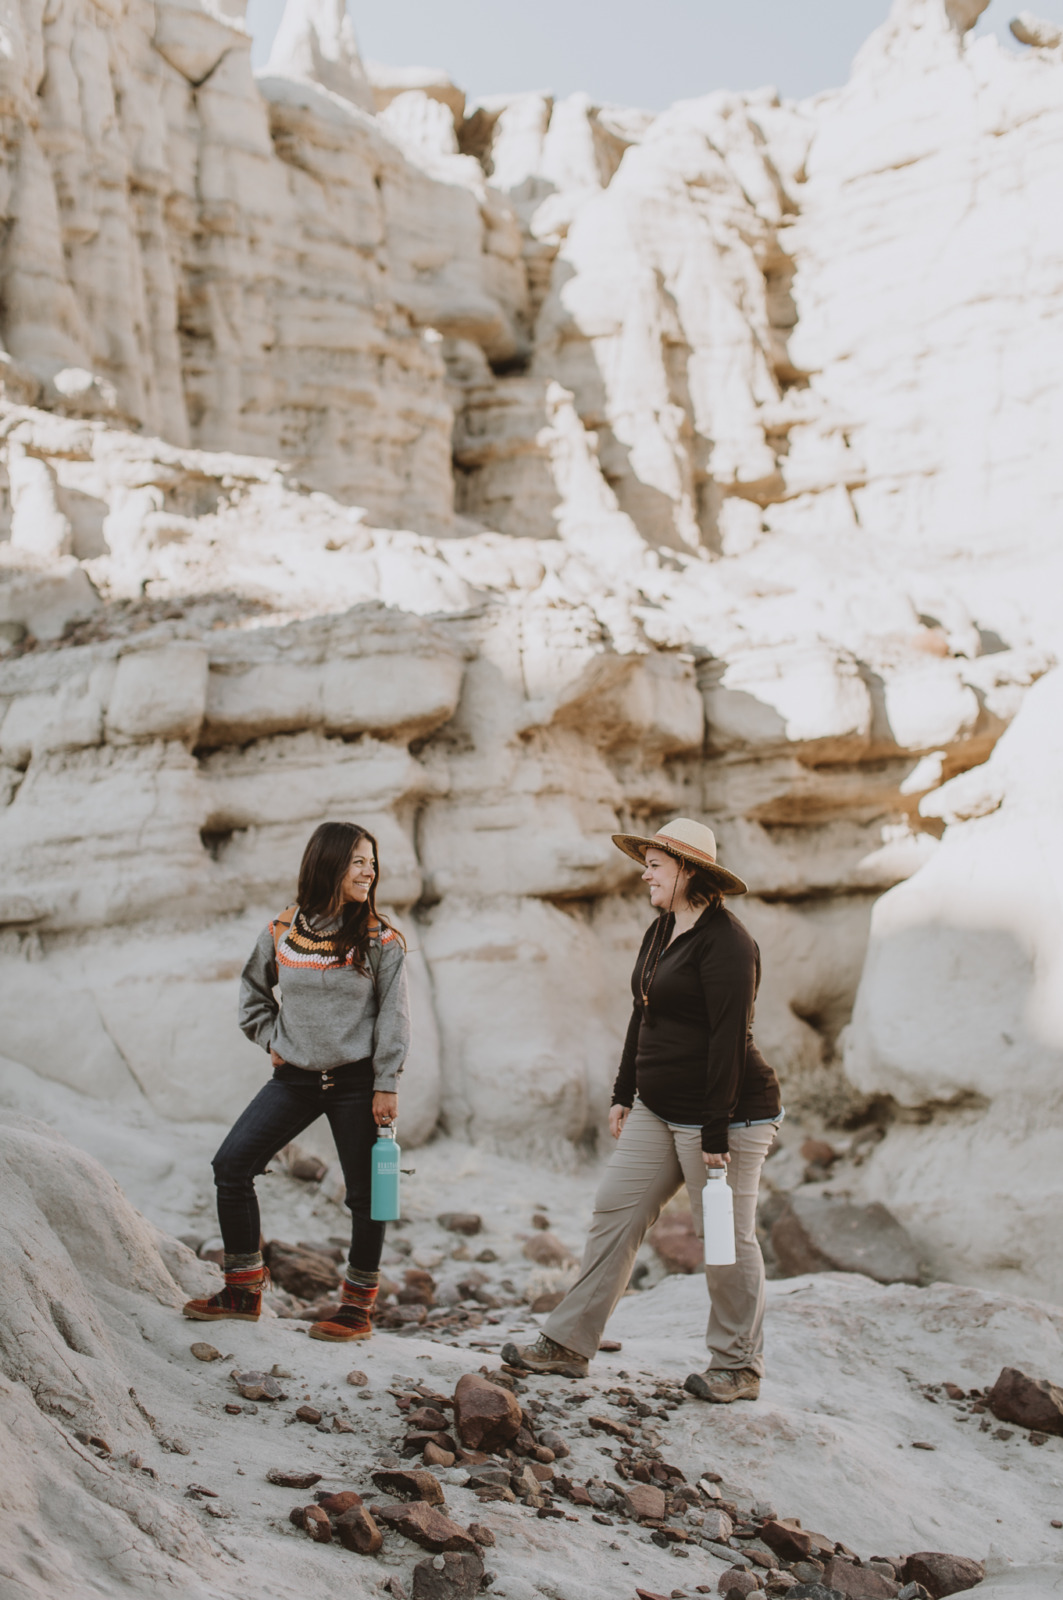 Two hikers shown in Plaza Blanca, New Mexico's white sandstone rock.